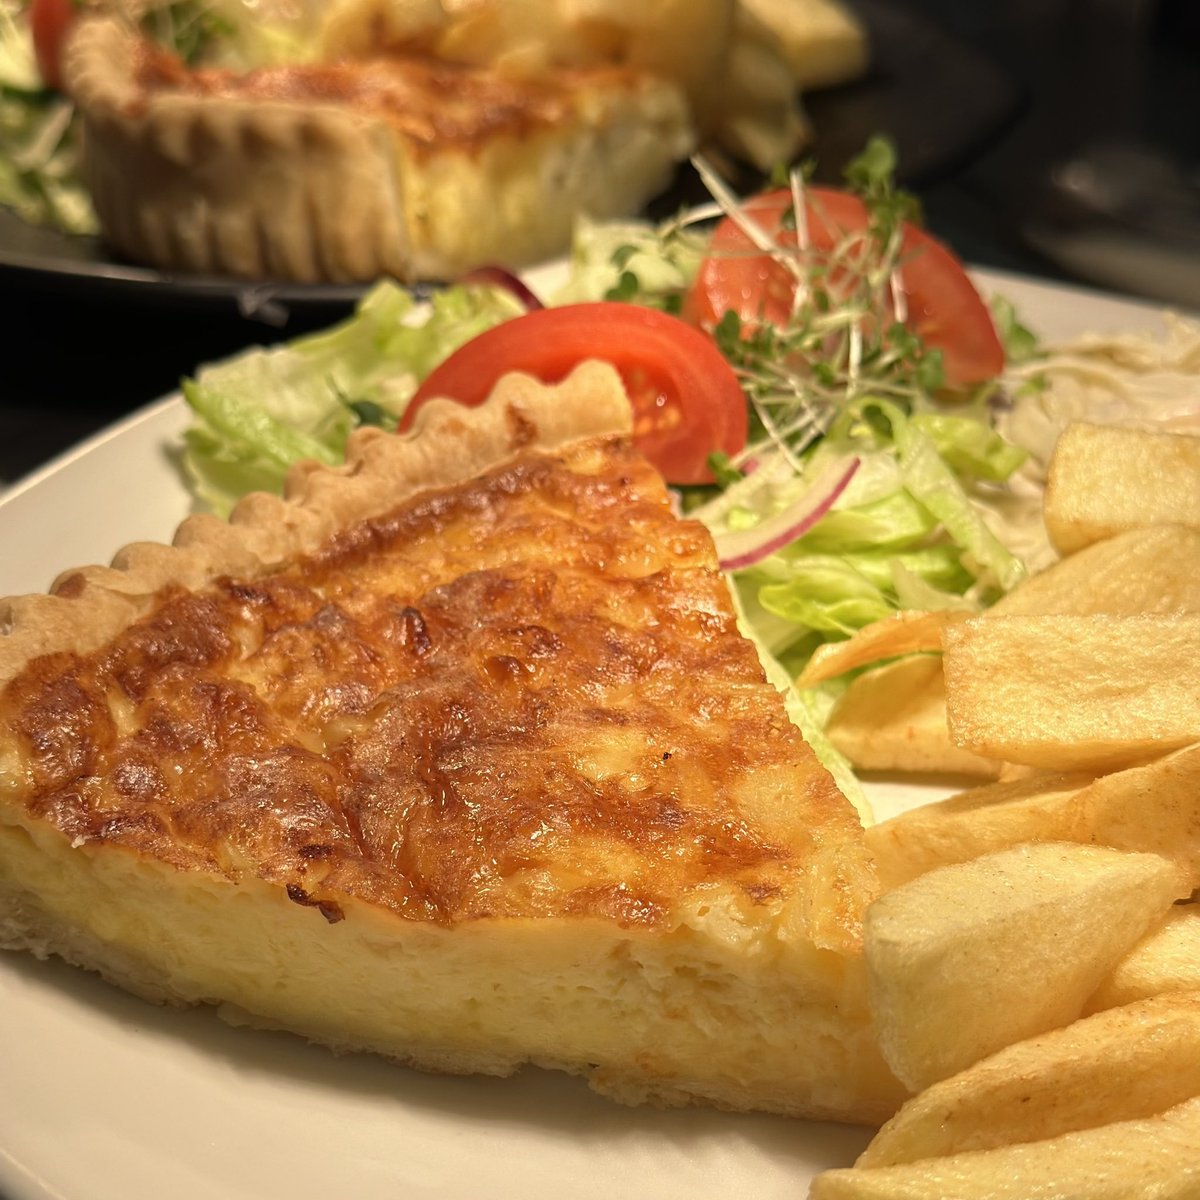 Have you tried our delicious quiches? #curleysdiningrooms #quiche #horwich #bolton #foodlover #boltonbusiness #lunchideas #mondaymotivation